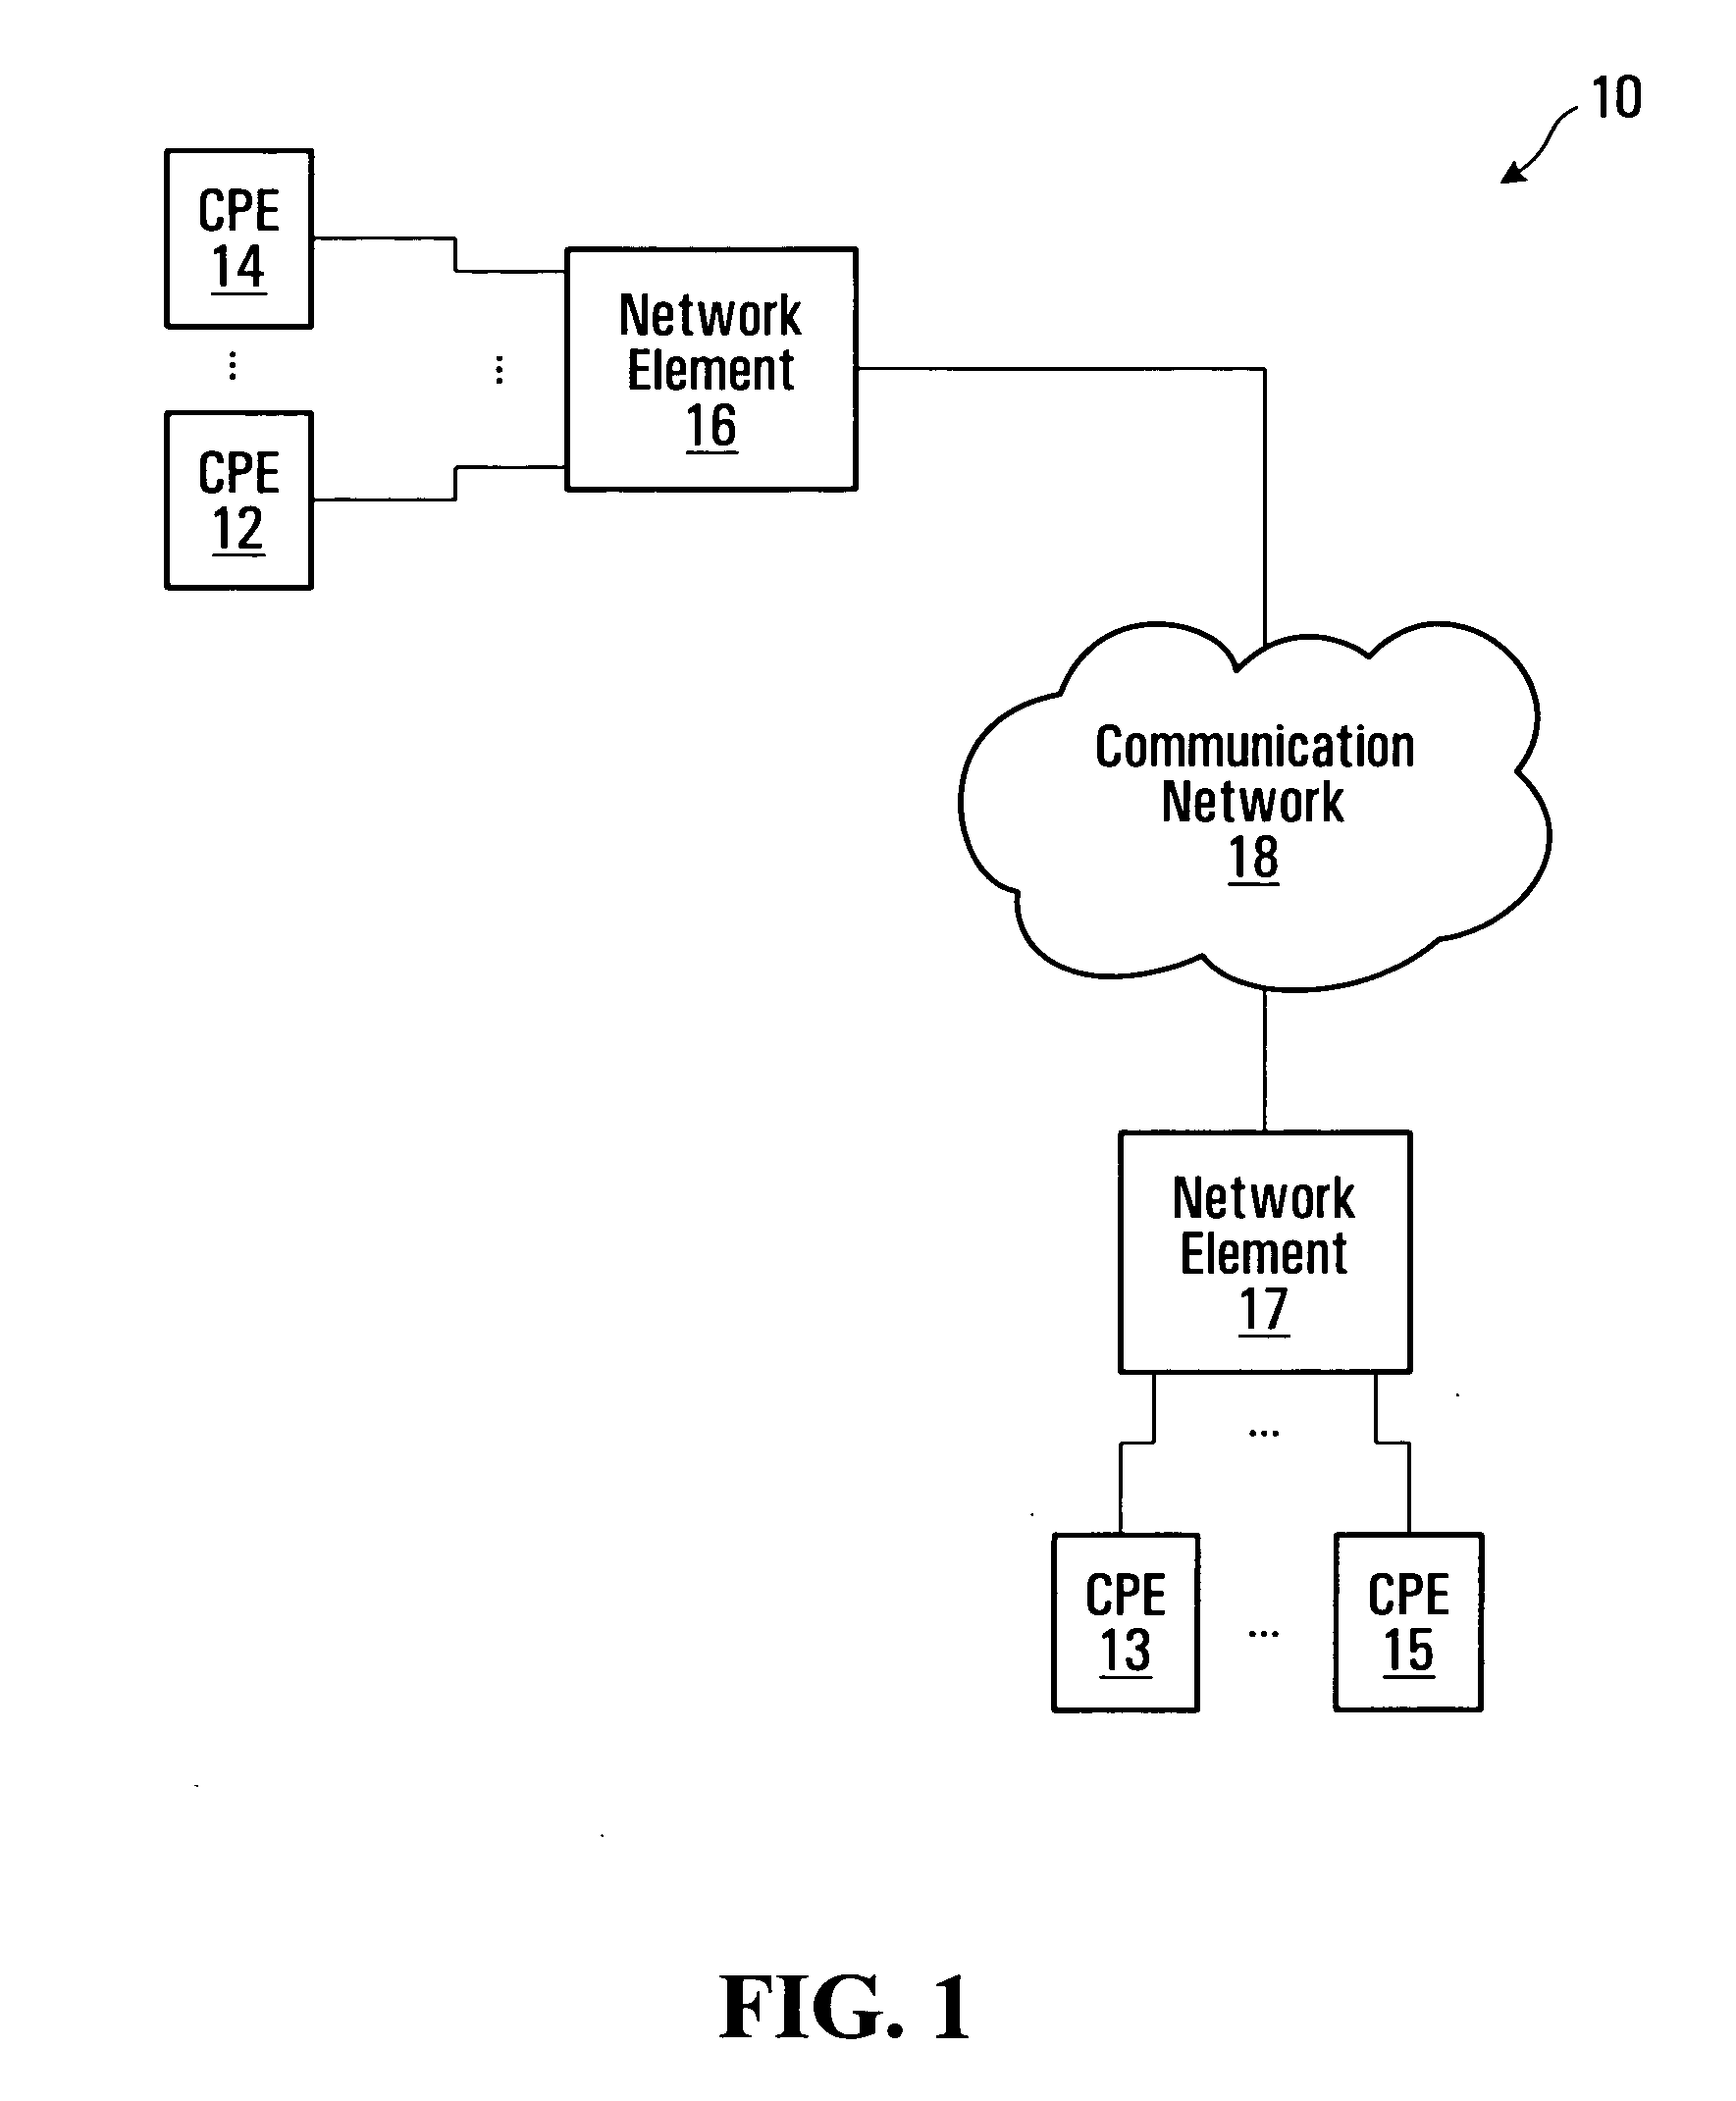 Remote control and control redundancy for distributed communication equipment